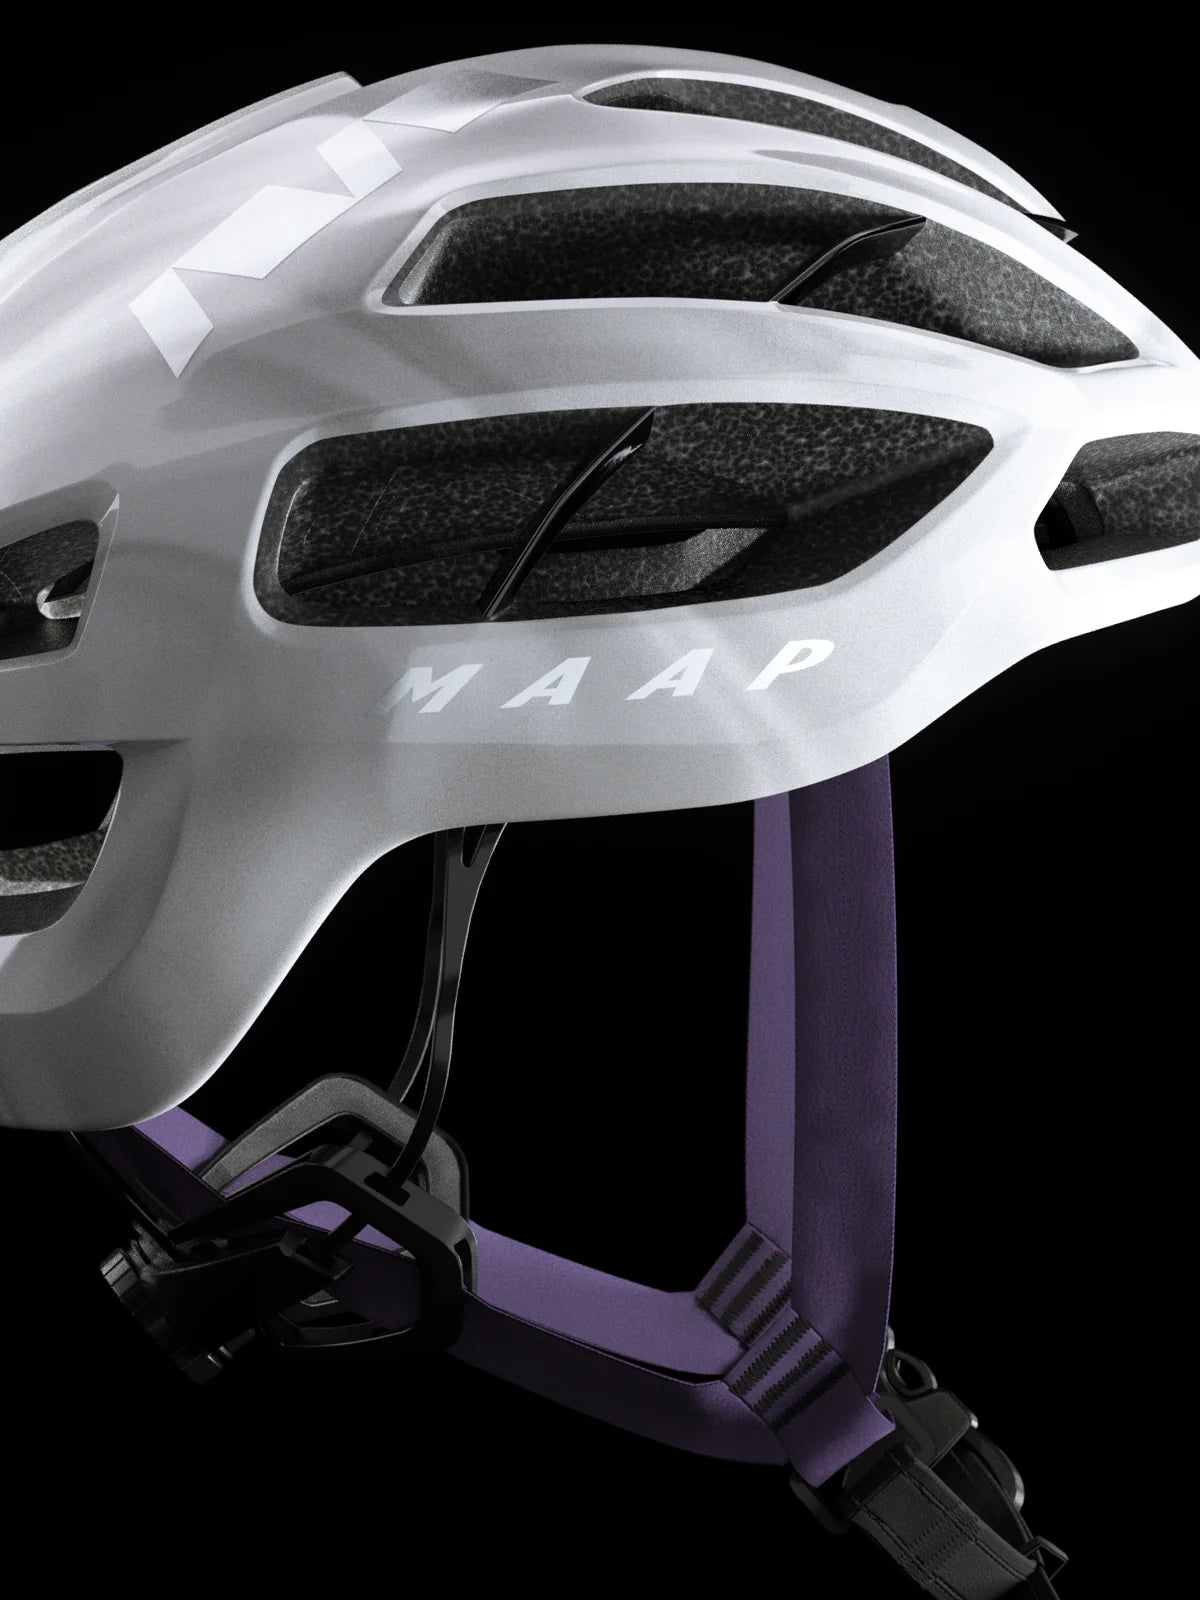 MAAP X KASK Protone Icon ヘルメット フォグ | 美学とパフォーマンスの究極の融合 | CYCLISM